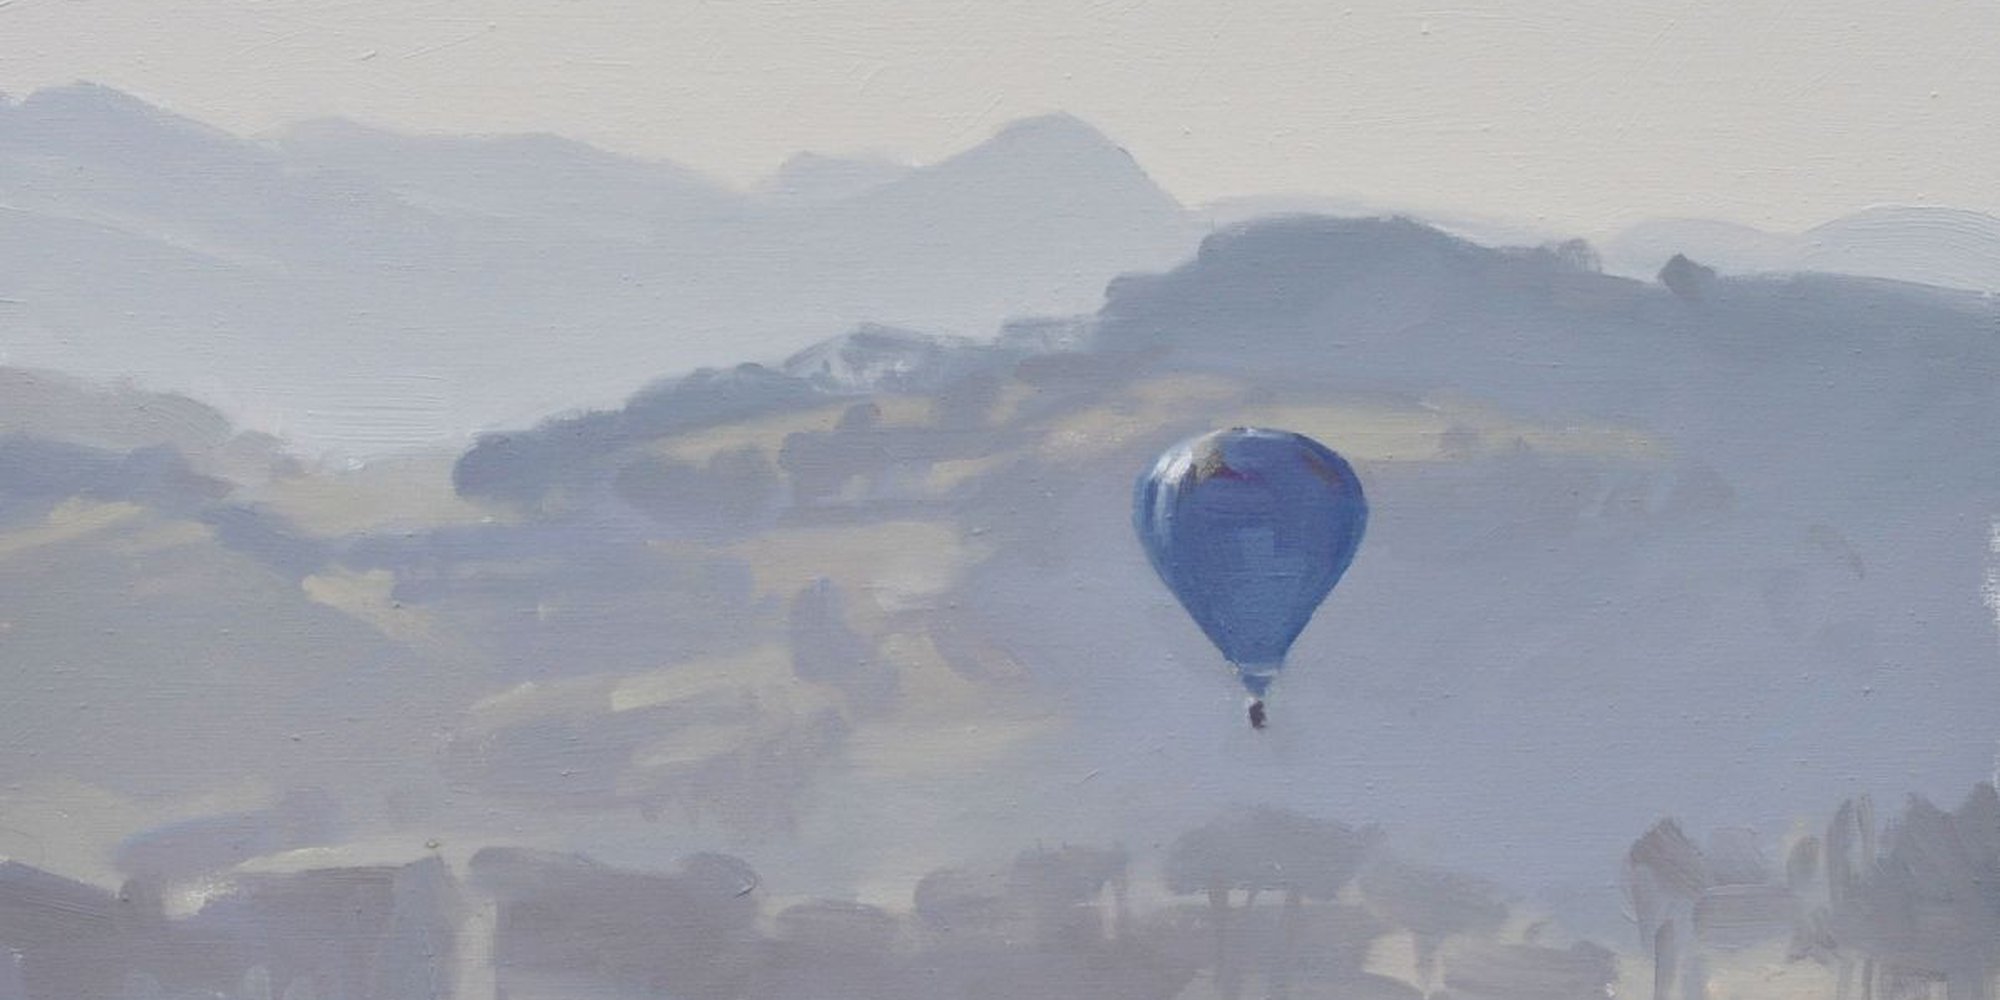 Art of the Day: "April 09, hot air balloon in the morning light, 2016" by ANNE BAUDEQUIN